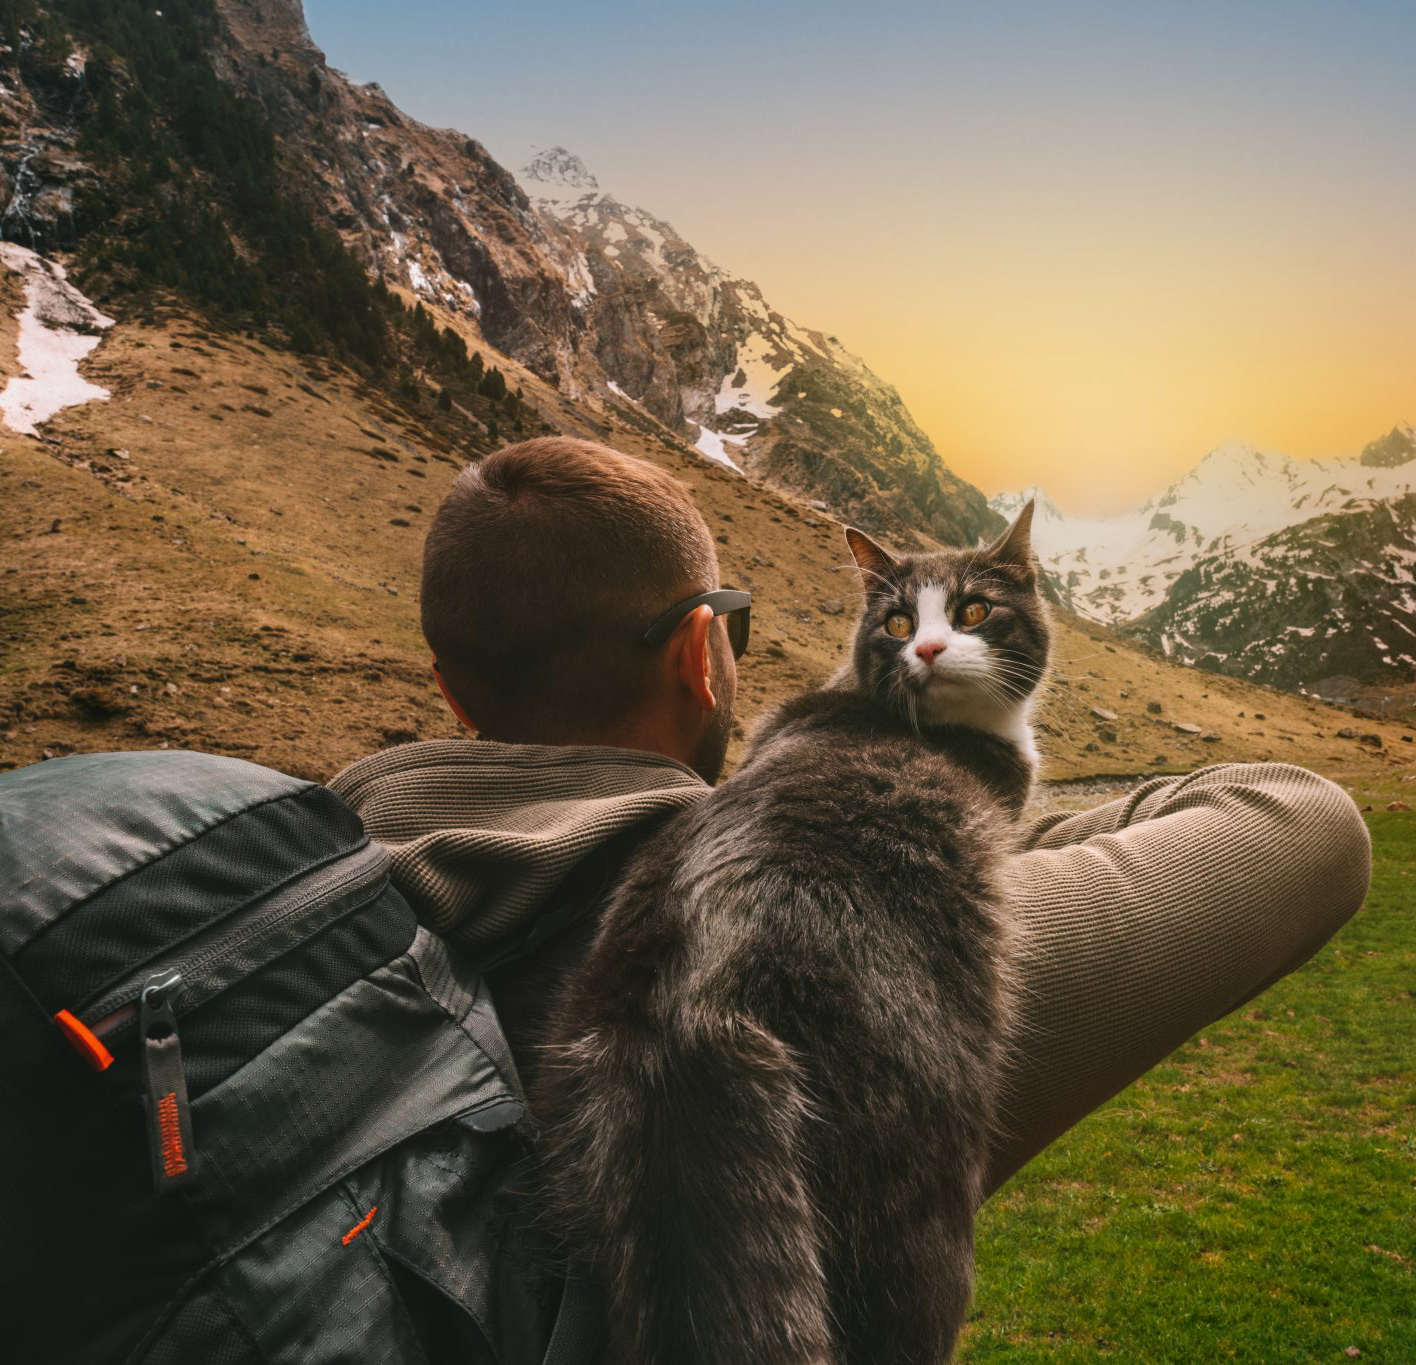 A man is hiking in the mountains with a cat on his back